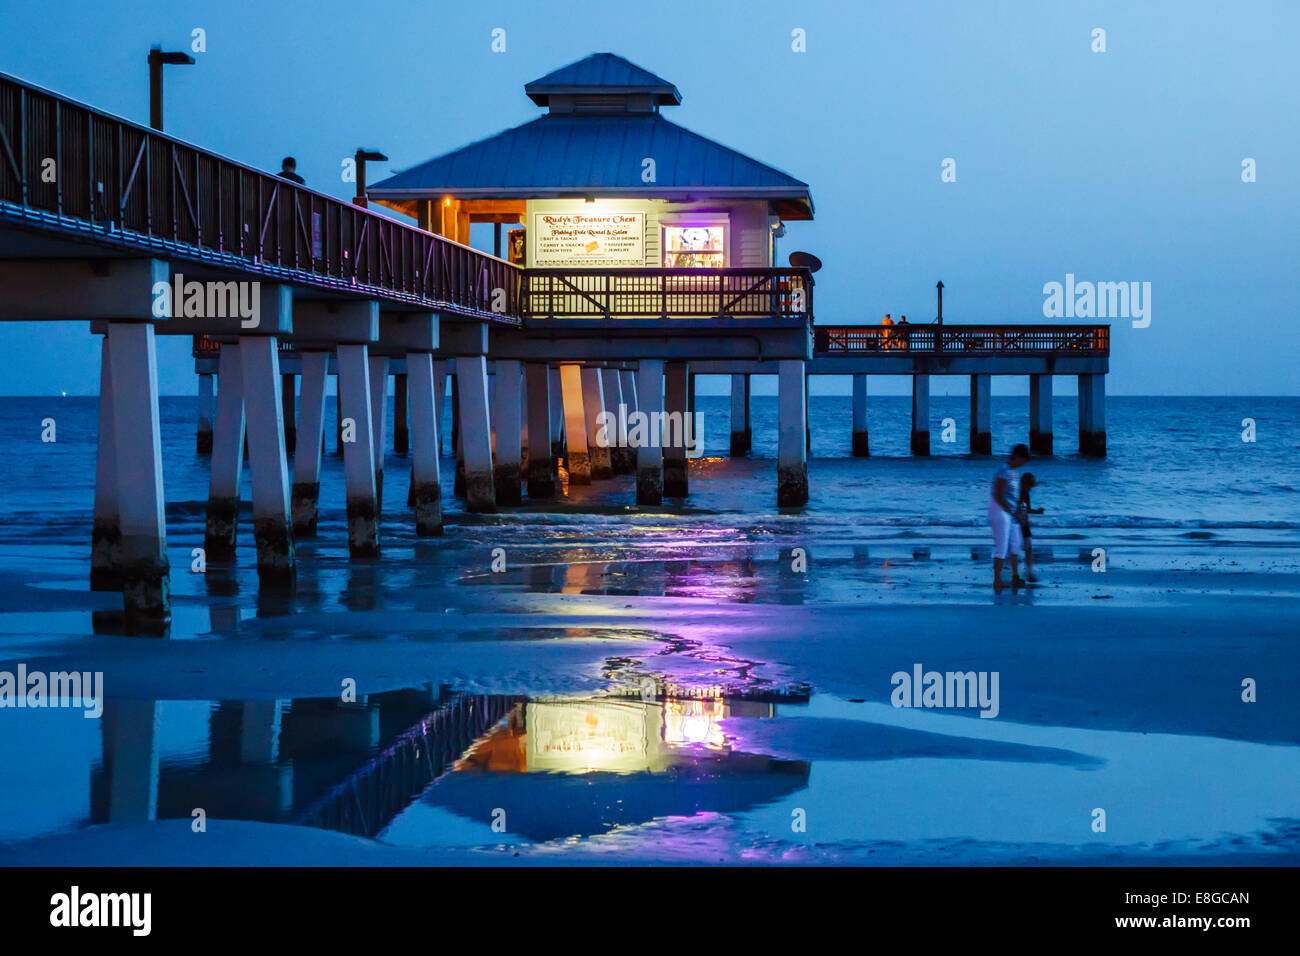 Fort Ft. Myers Beach Florida,Gulf of Mexico,beach beaches,sand,Fishing Pier,Rudy's Treasure Chest,night nightlife evening after dark,surf,low tide,vis Stock Photo